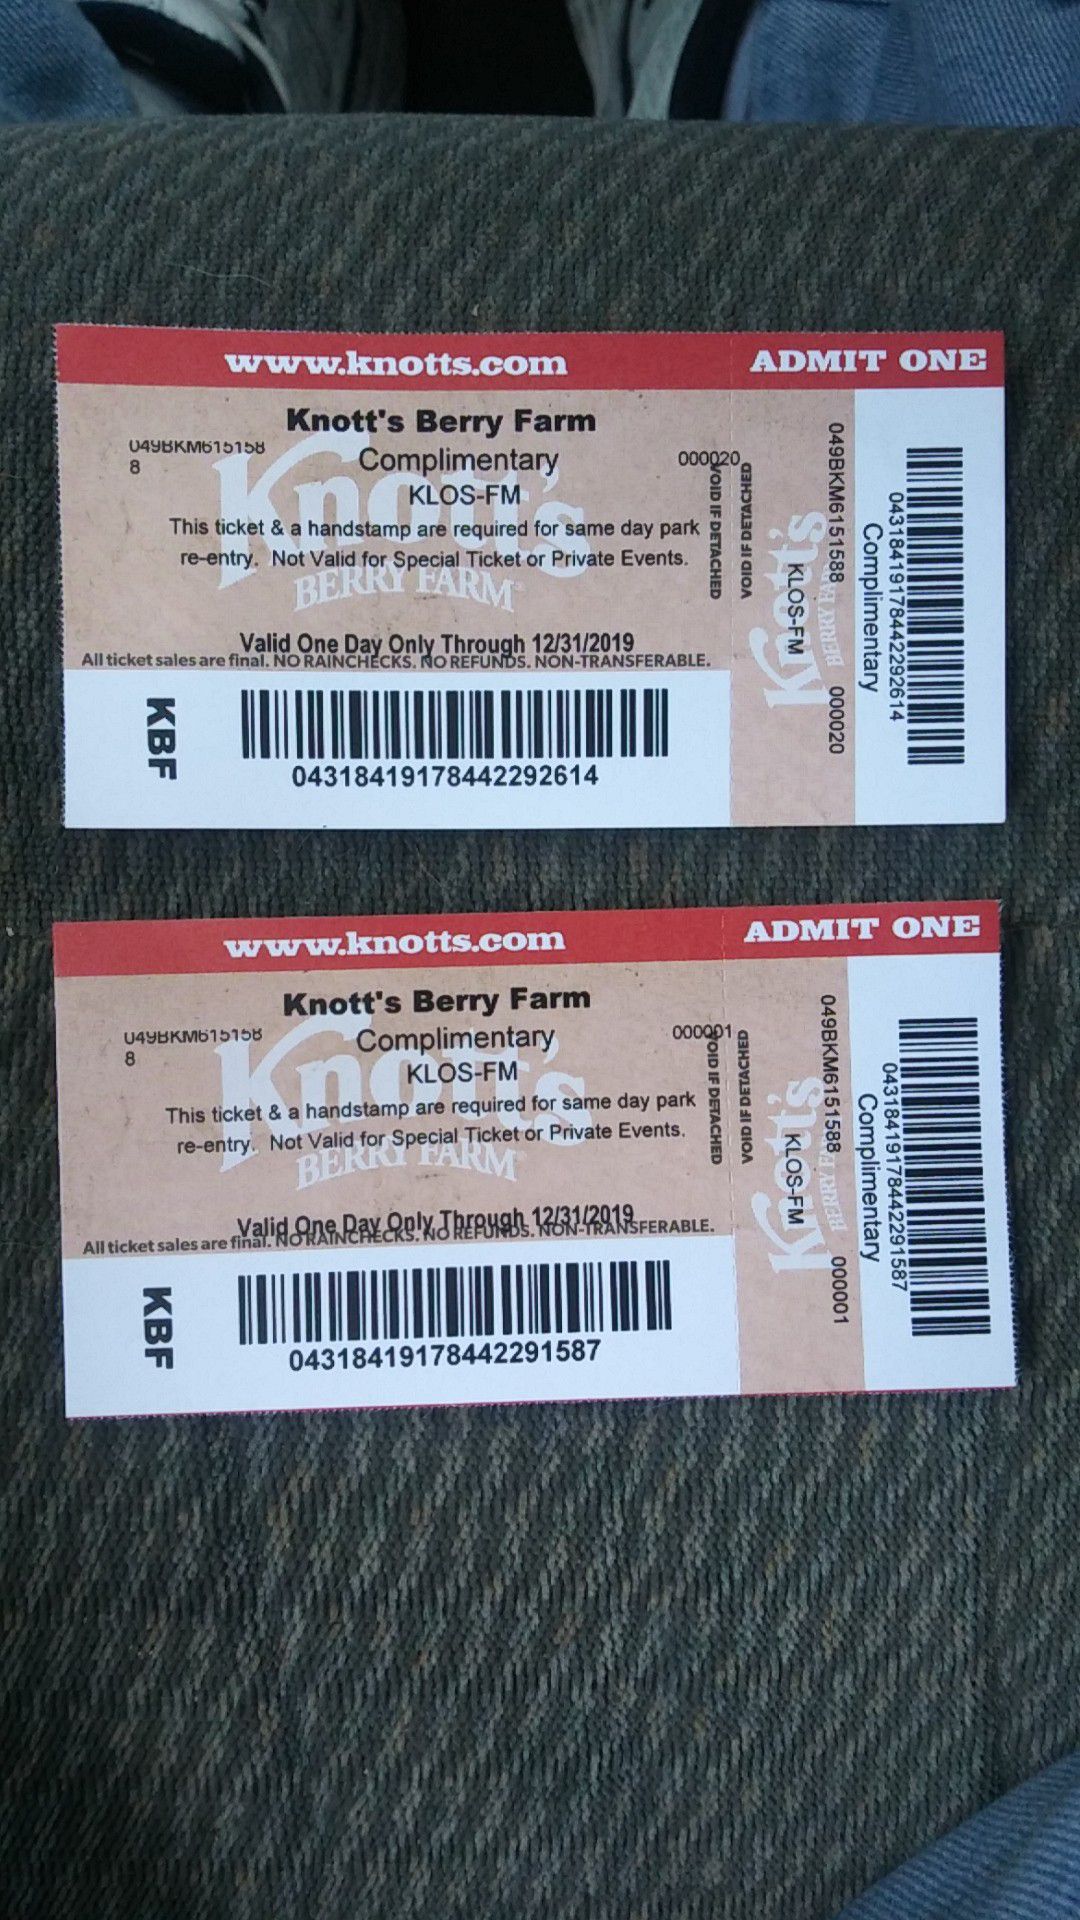 2 One day passes for knotts berry farm